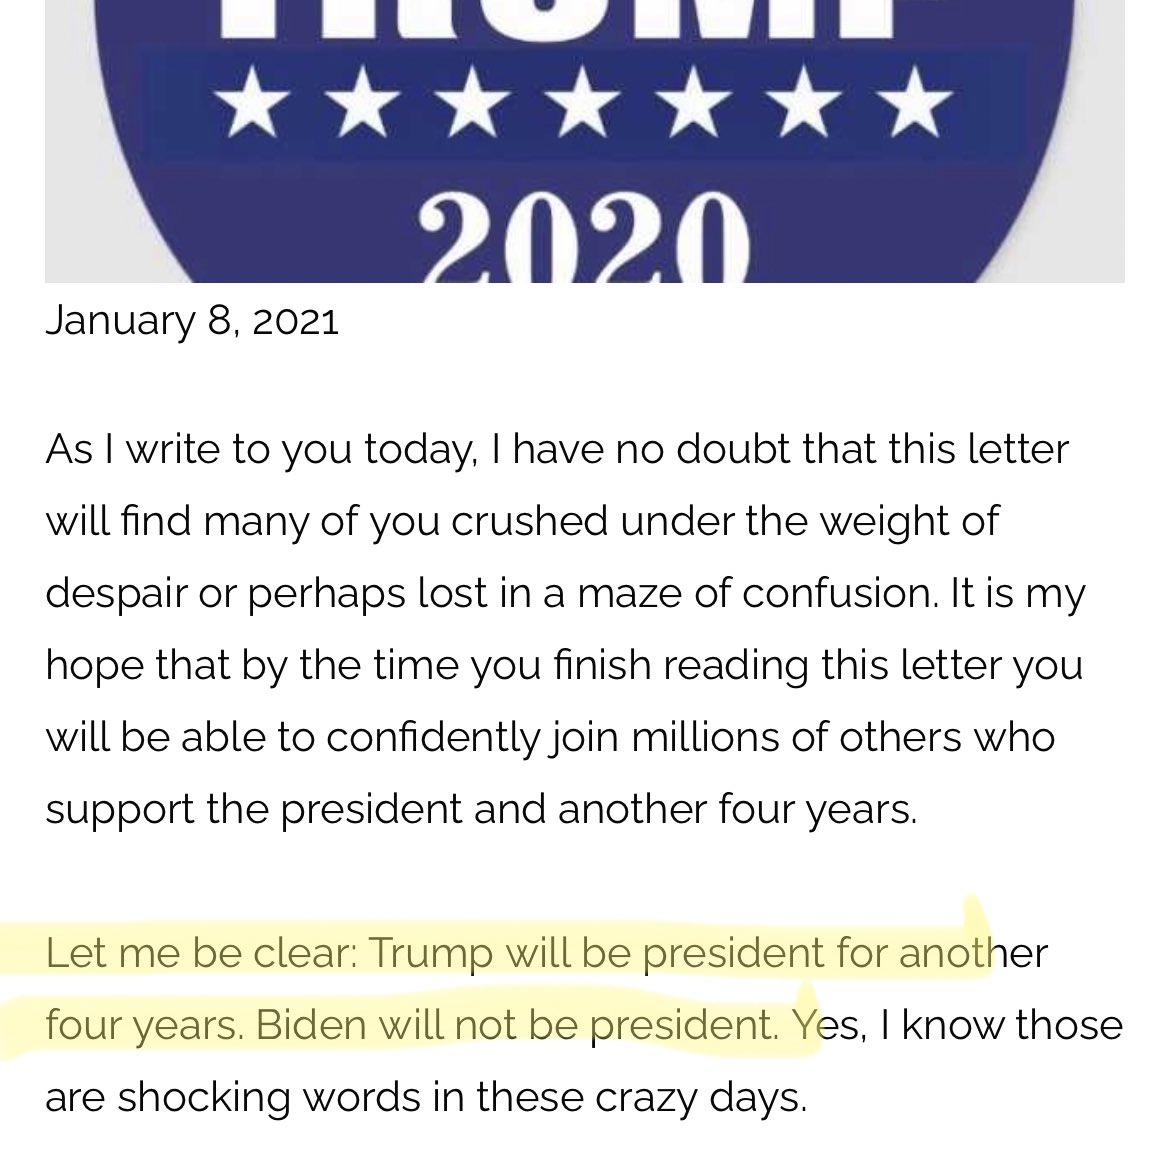 A Nevada GOP Chairman sent this BONKERS letter to Republican voters:"Let me be clear: Trump will be president for another four years. Biden will not be president. Yes, I know those are shocking words in these crazy days."Next, he accuses Pence & the Cabinet of treason.1/